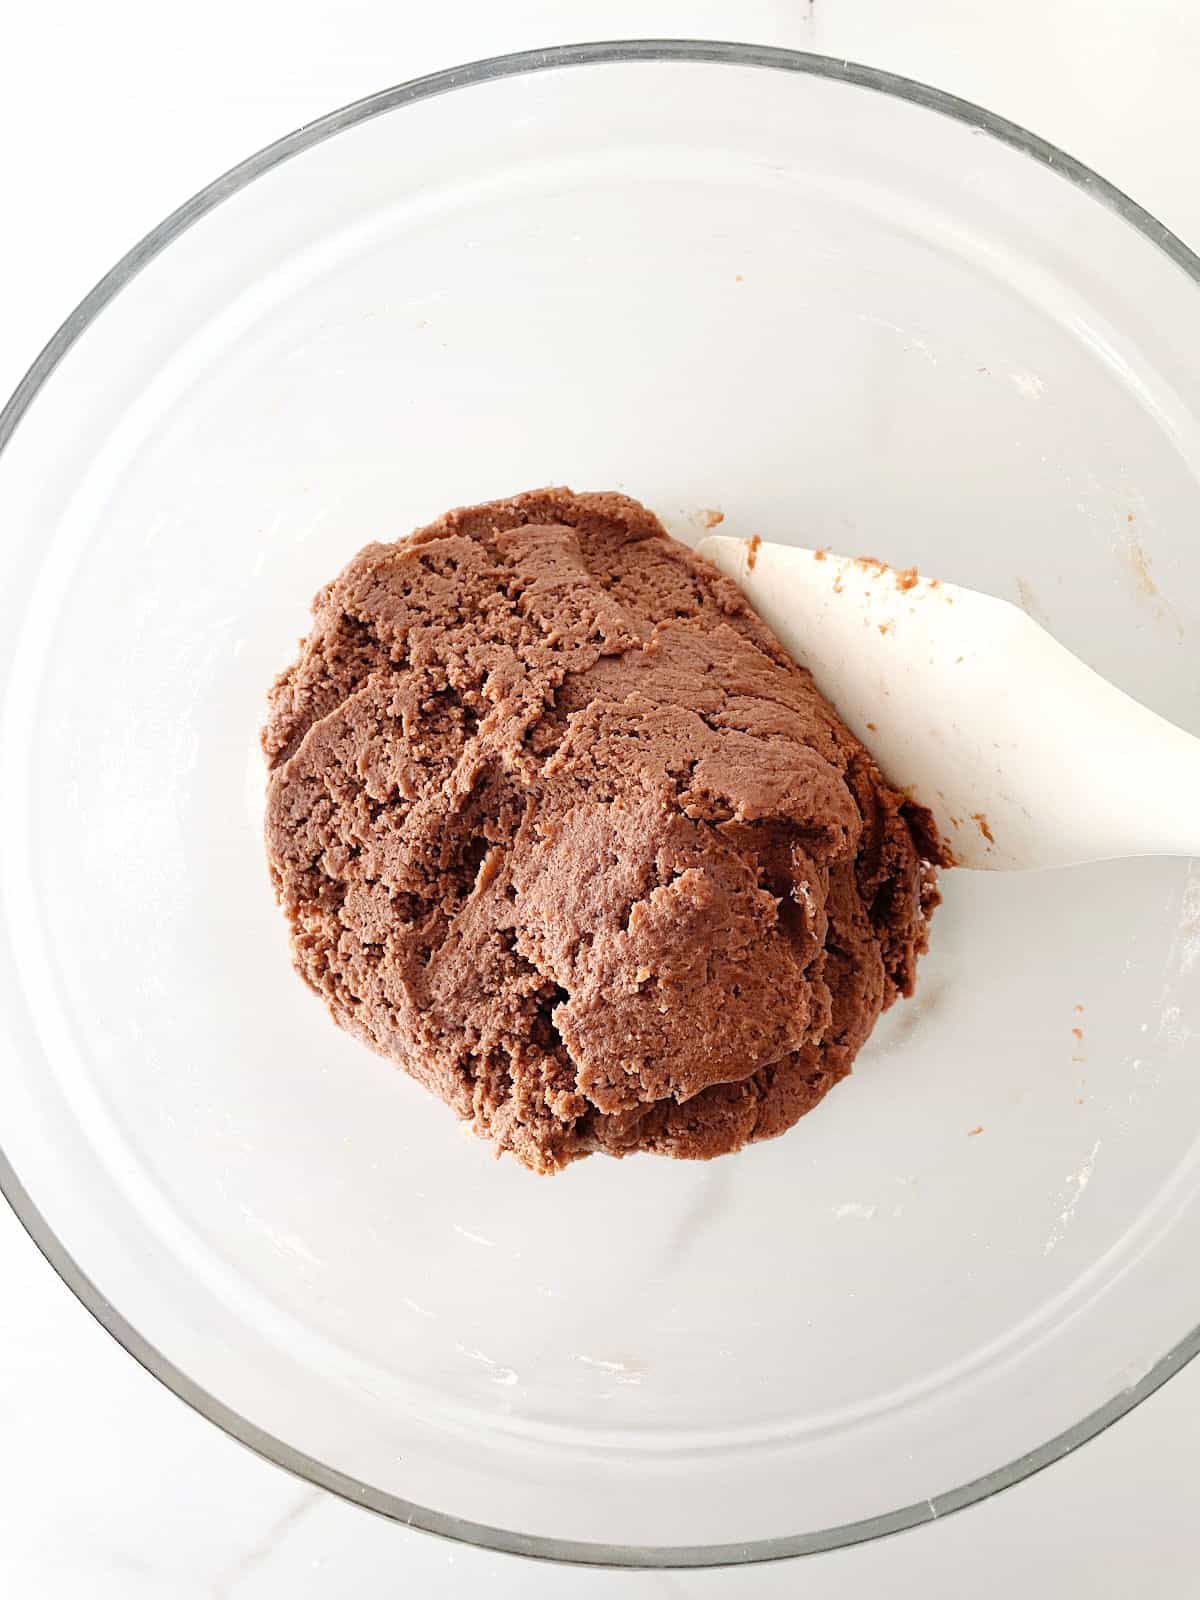 Top view of chocolate cookie dough in a glass bowl with white spatula on a white surface.